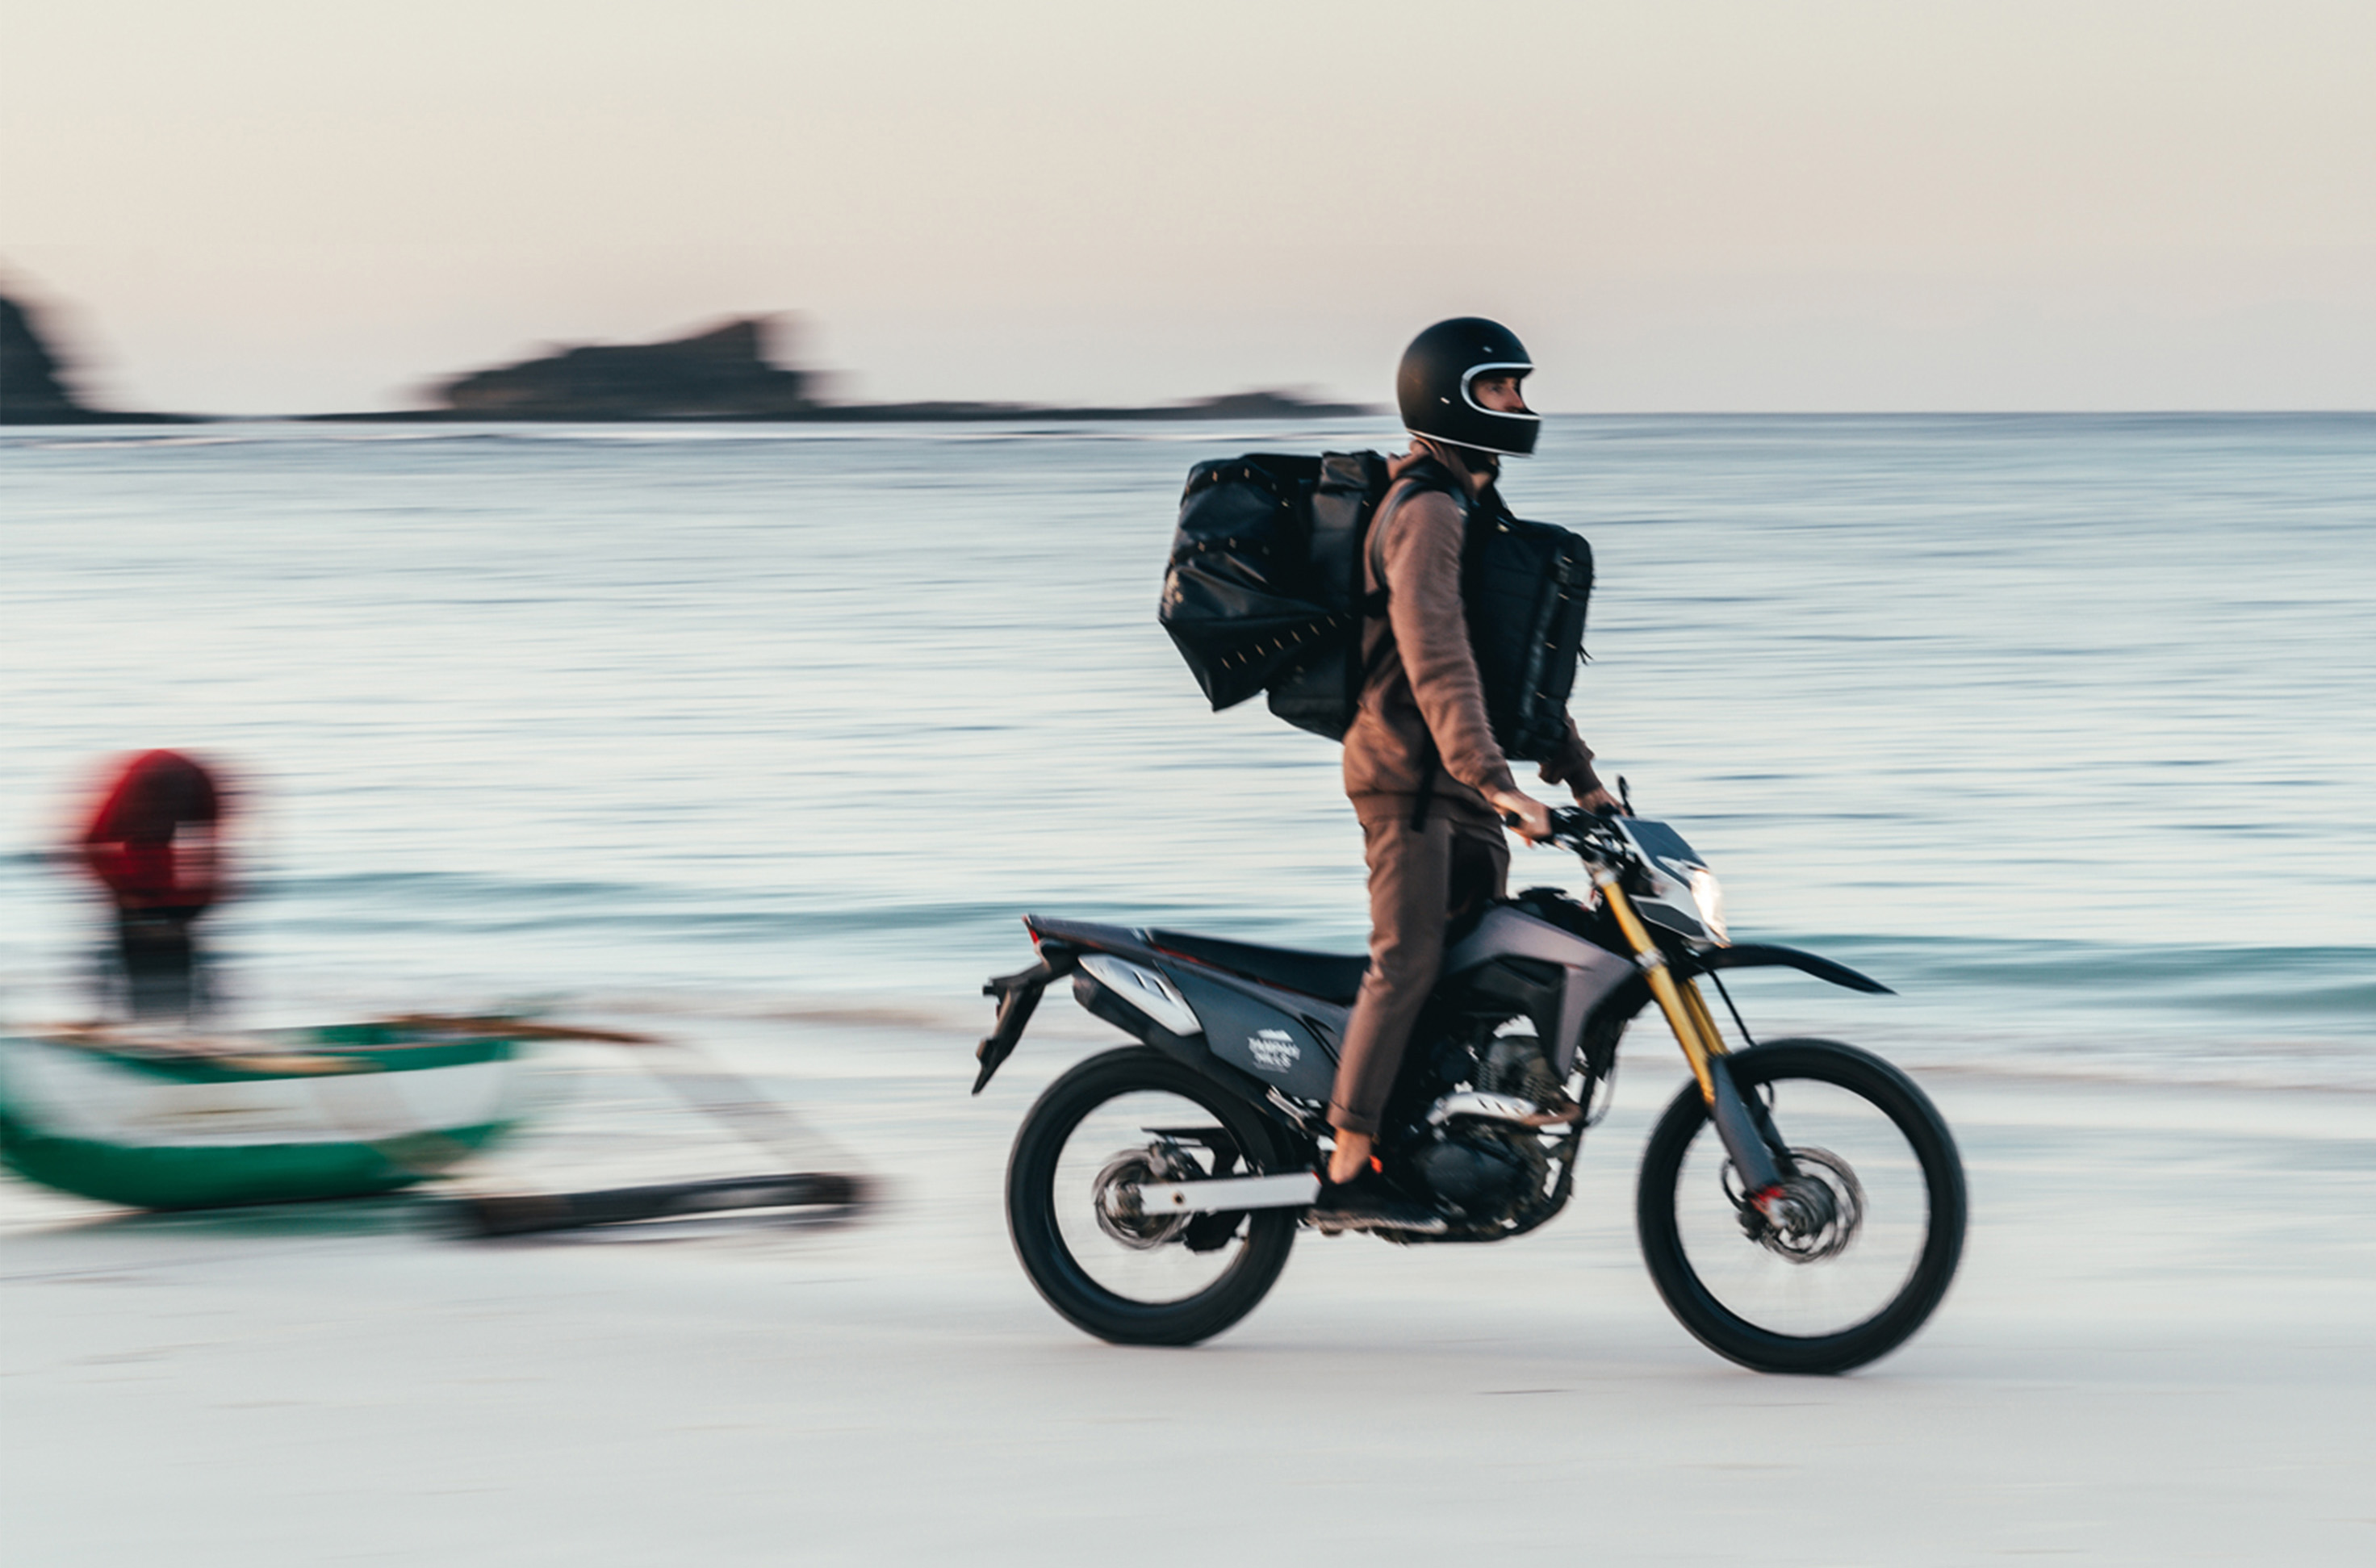 Man stands up on motorbike wearing camera bags on beach